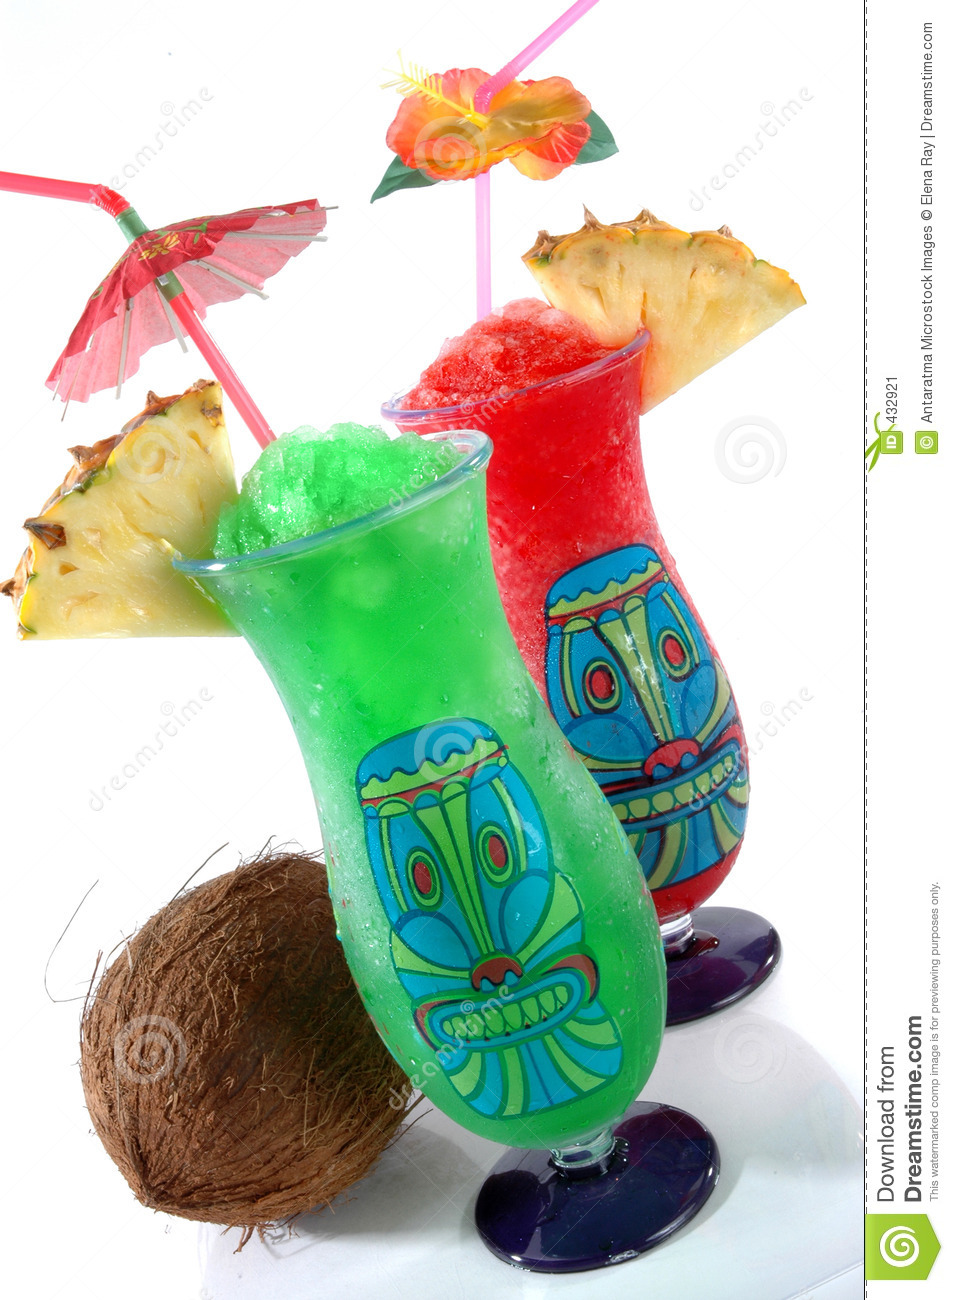 Fun Plastic Tiki Glasses Filled With Colorful Icy Drinks And A Coconut